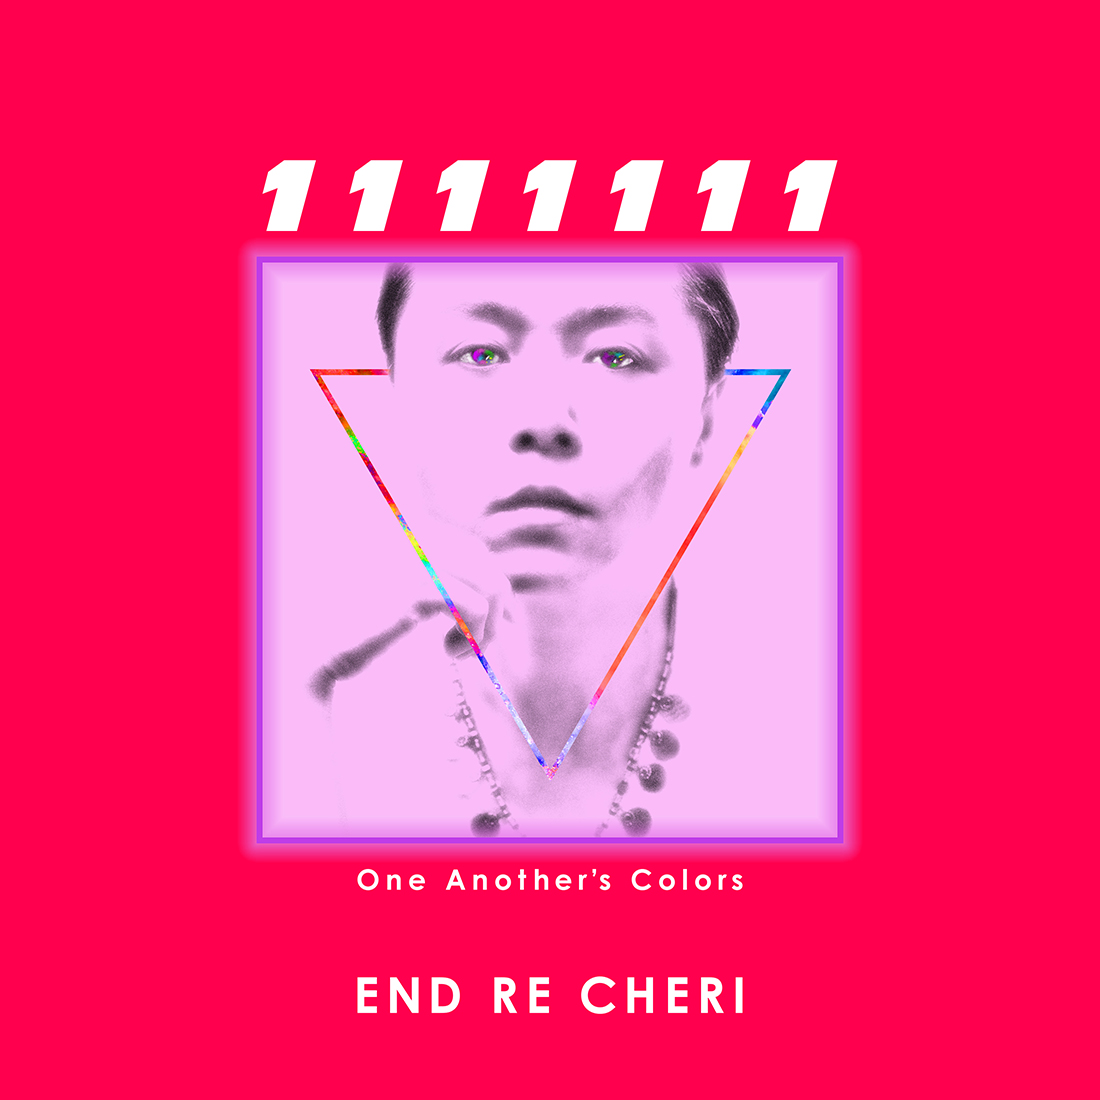 ENDRECHERI、2ndデジタルシングル「1111111 ～One Another’s Colors～」リリース決定 - 画像一覧（1/1）